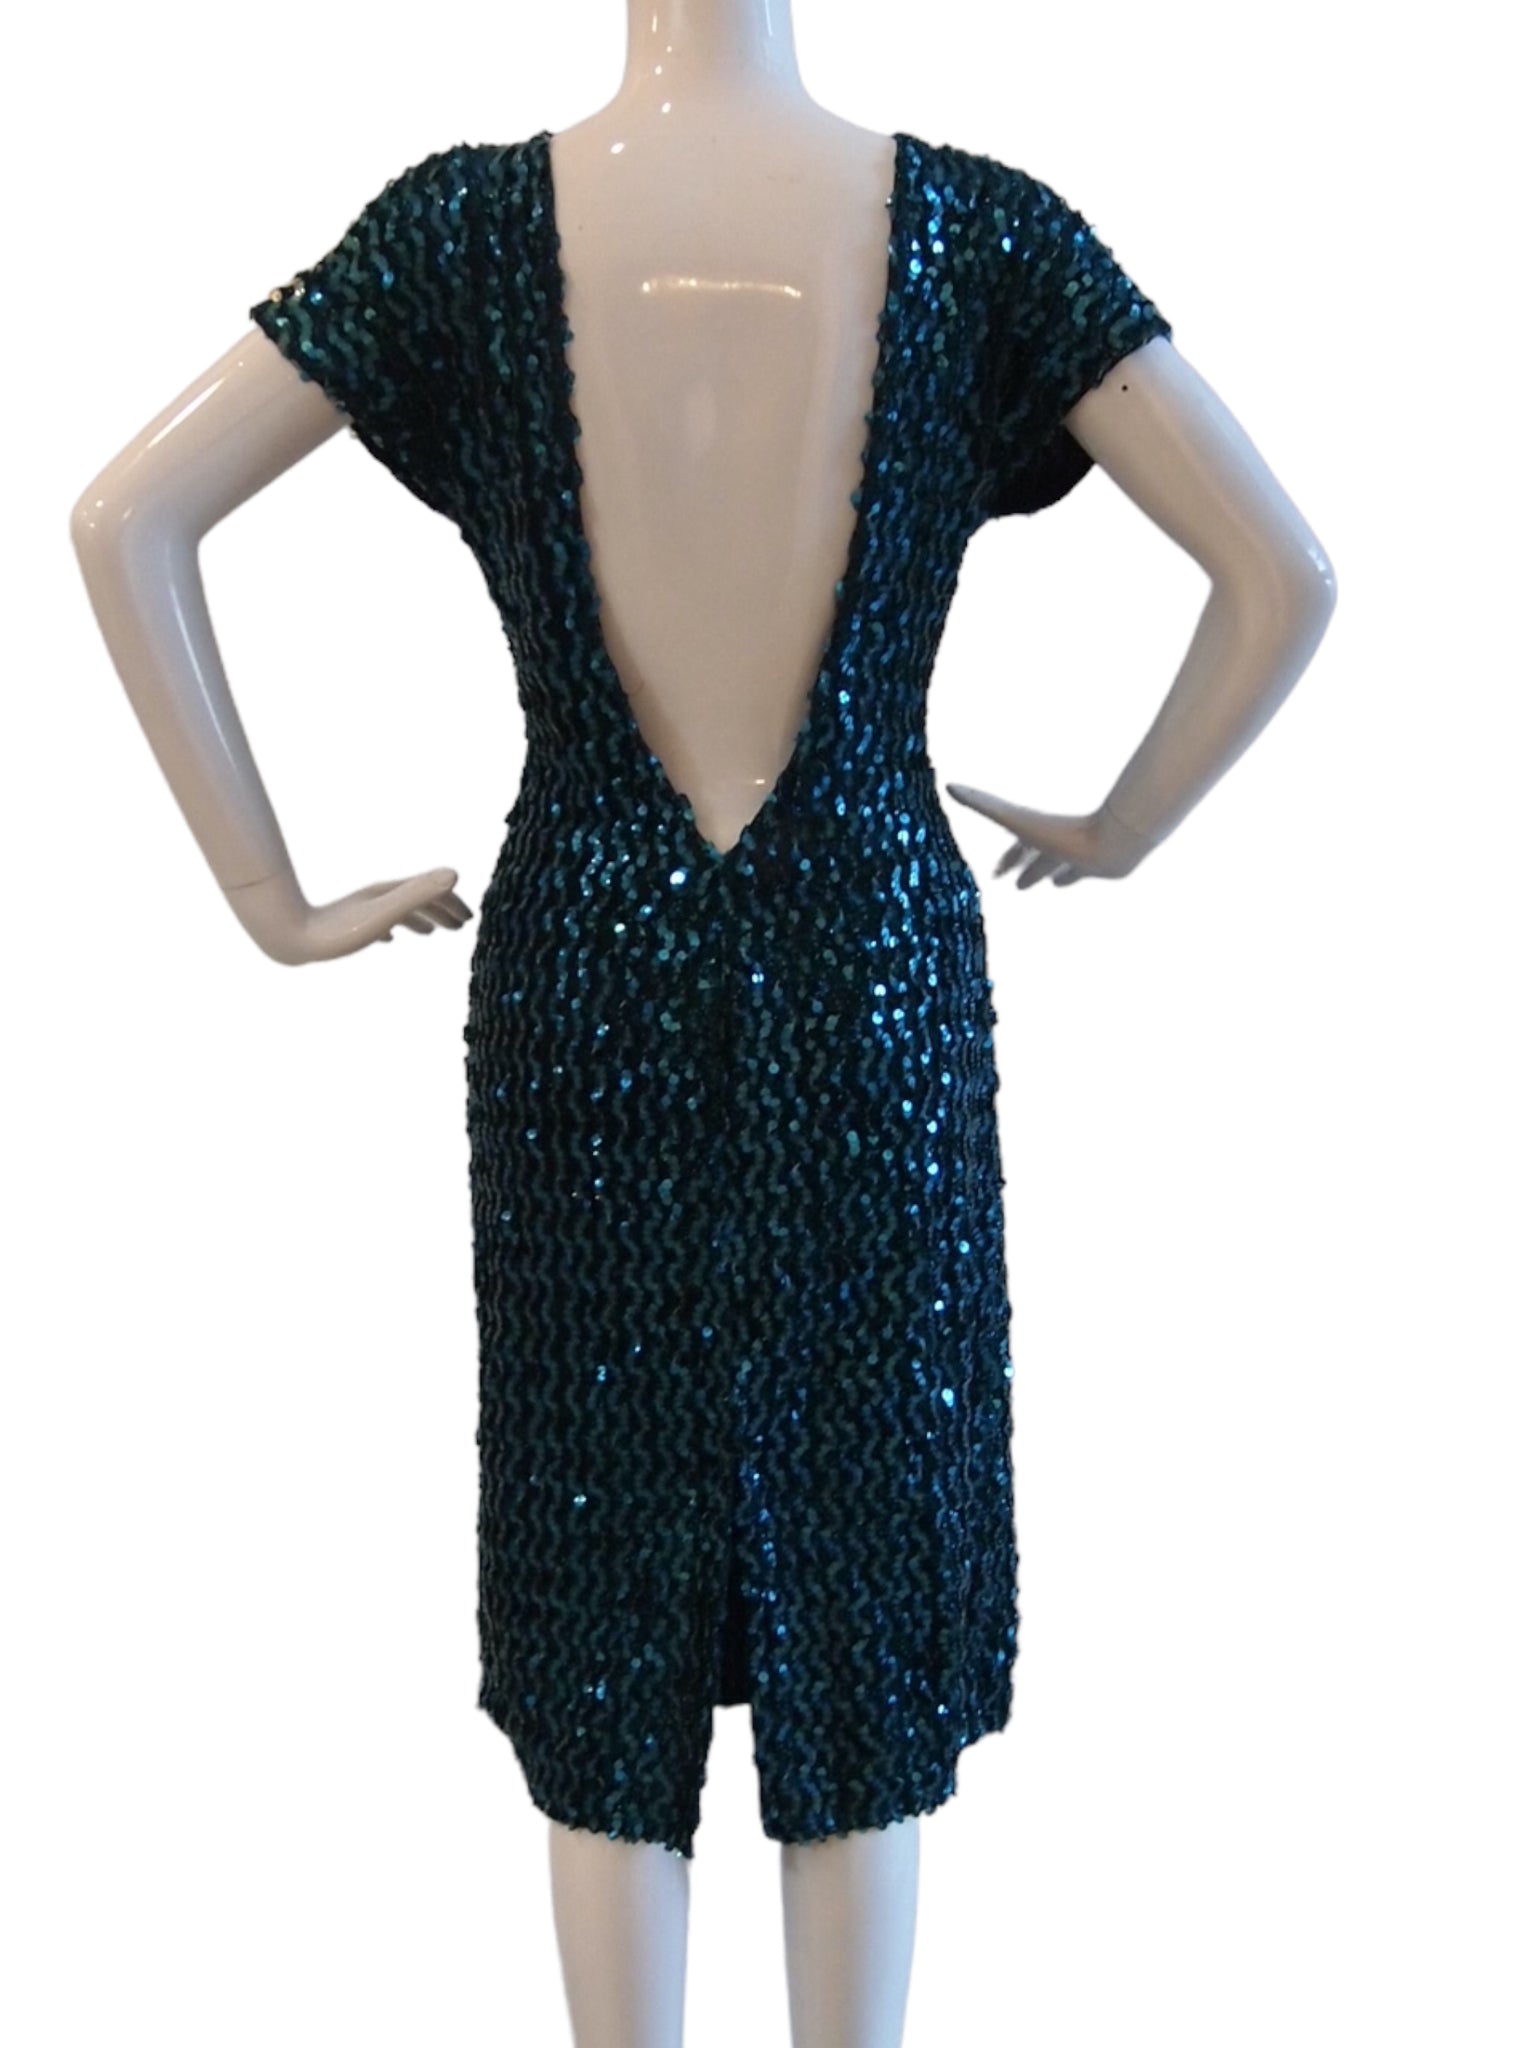 The Shimmery Sea Fully Beaded Sequinned Cocktail Evening Dress